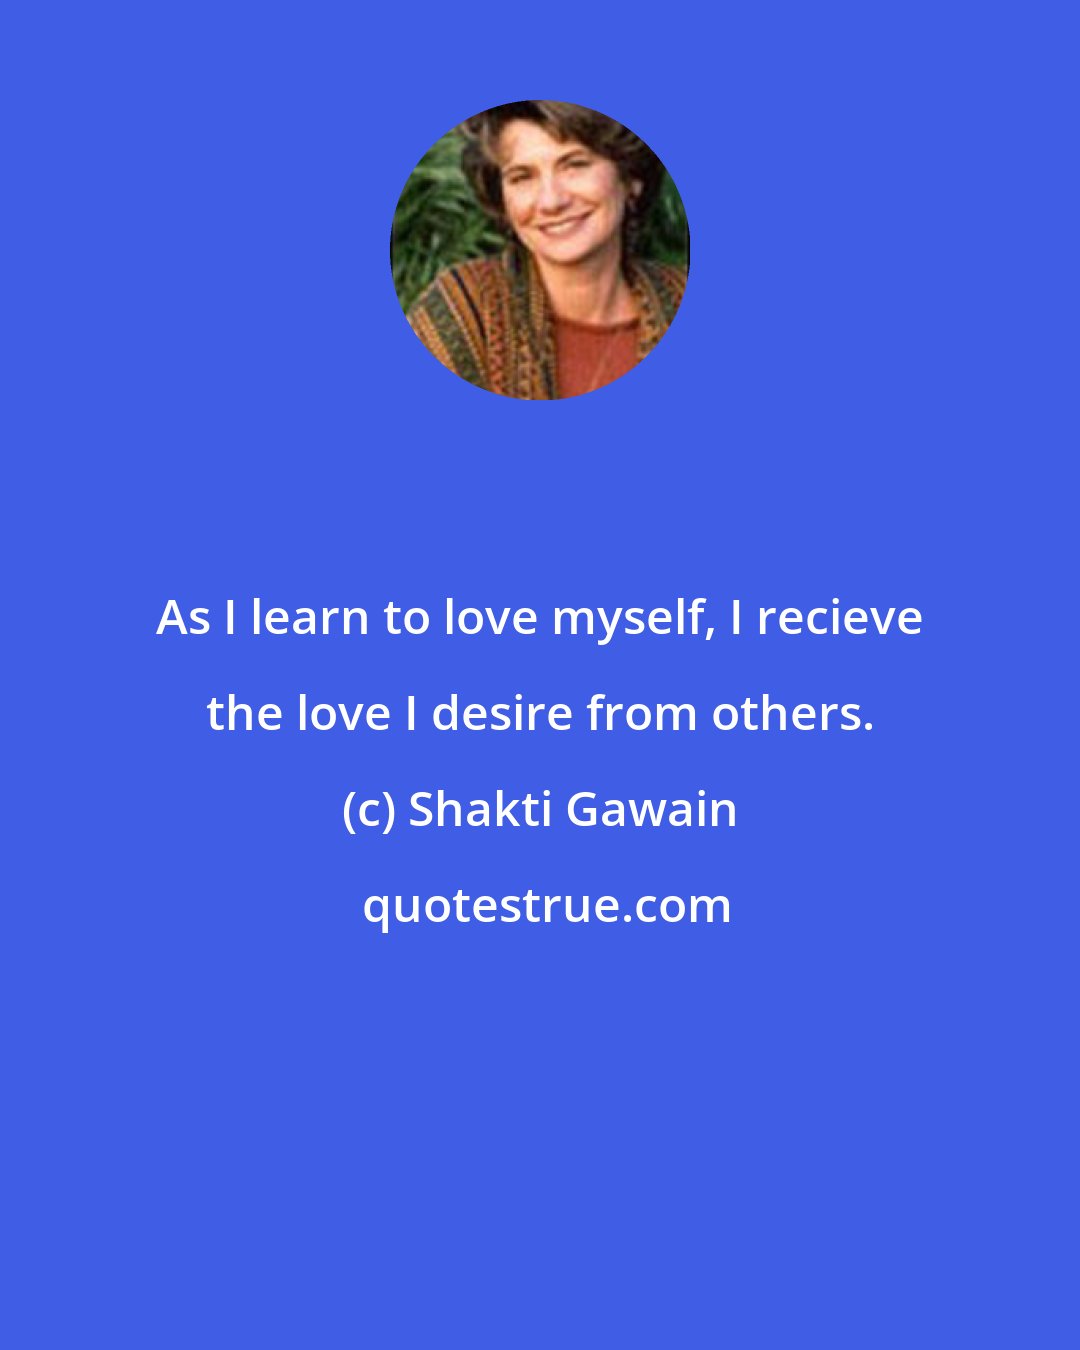 Shakti Gawain: As I learn to love myself, I recieve the love I desire from others.